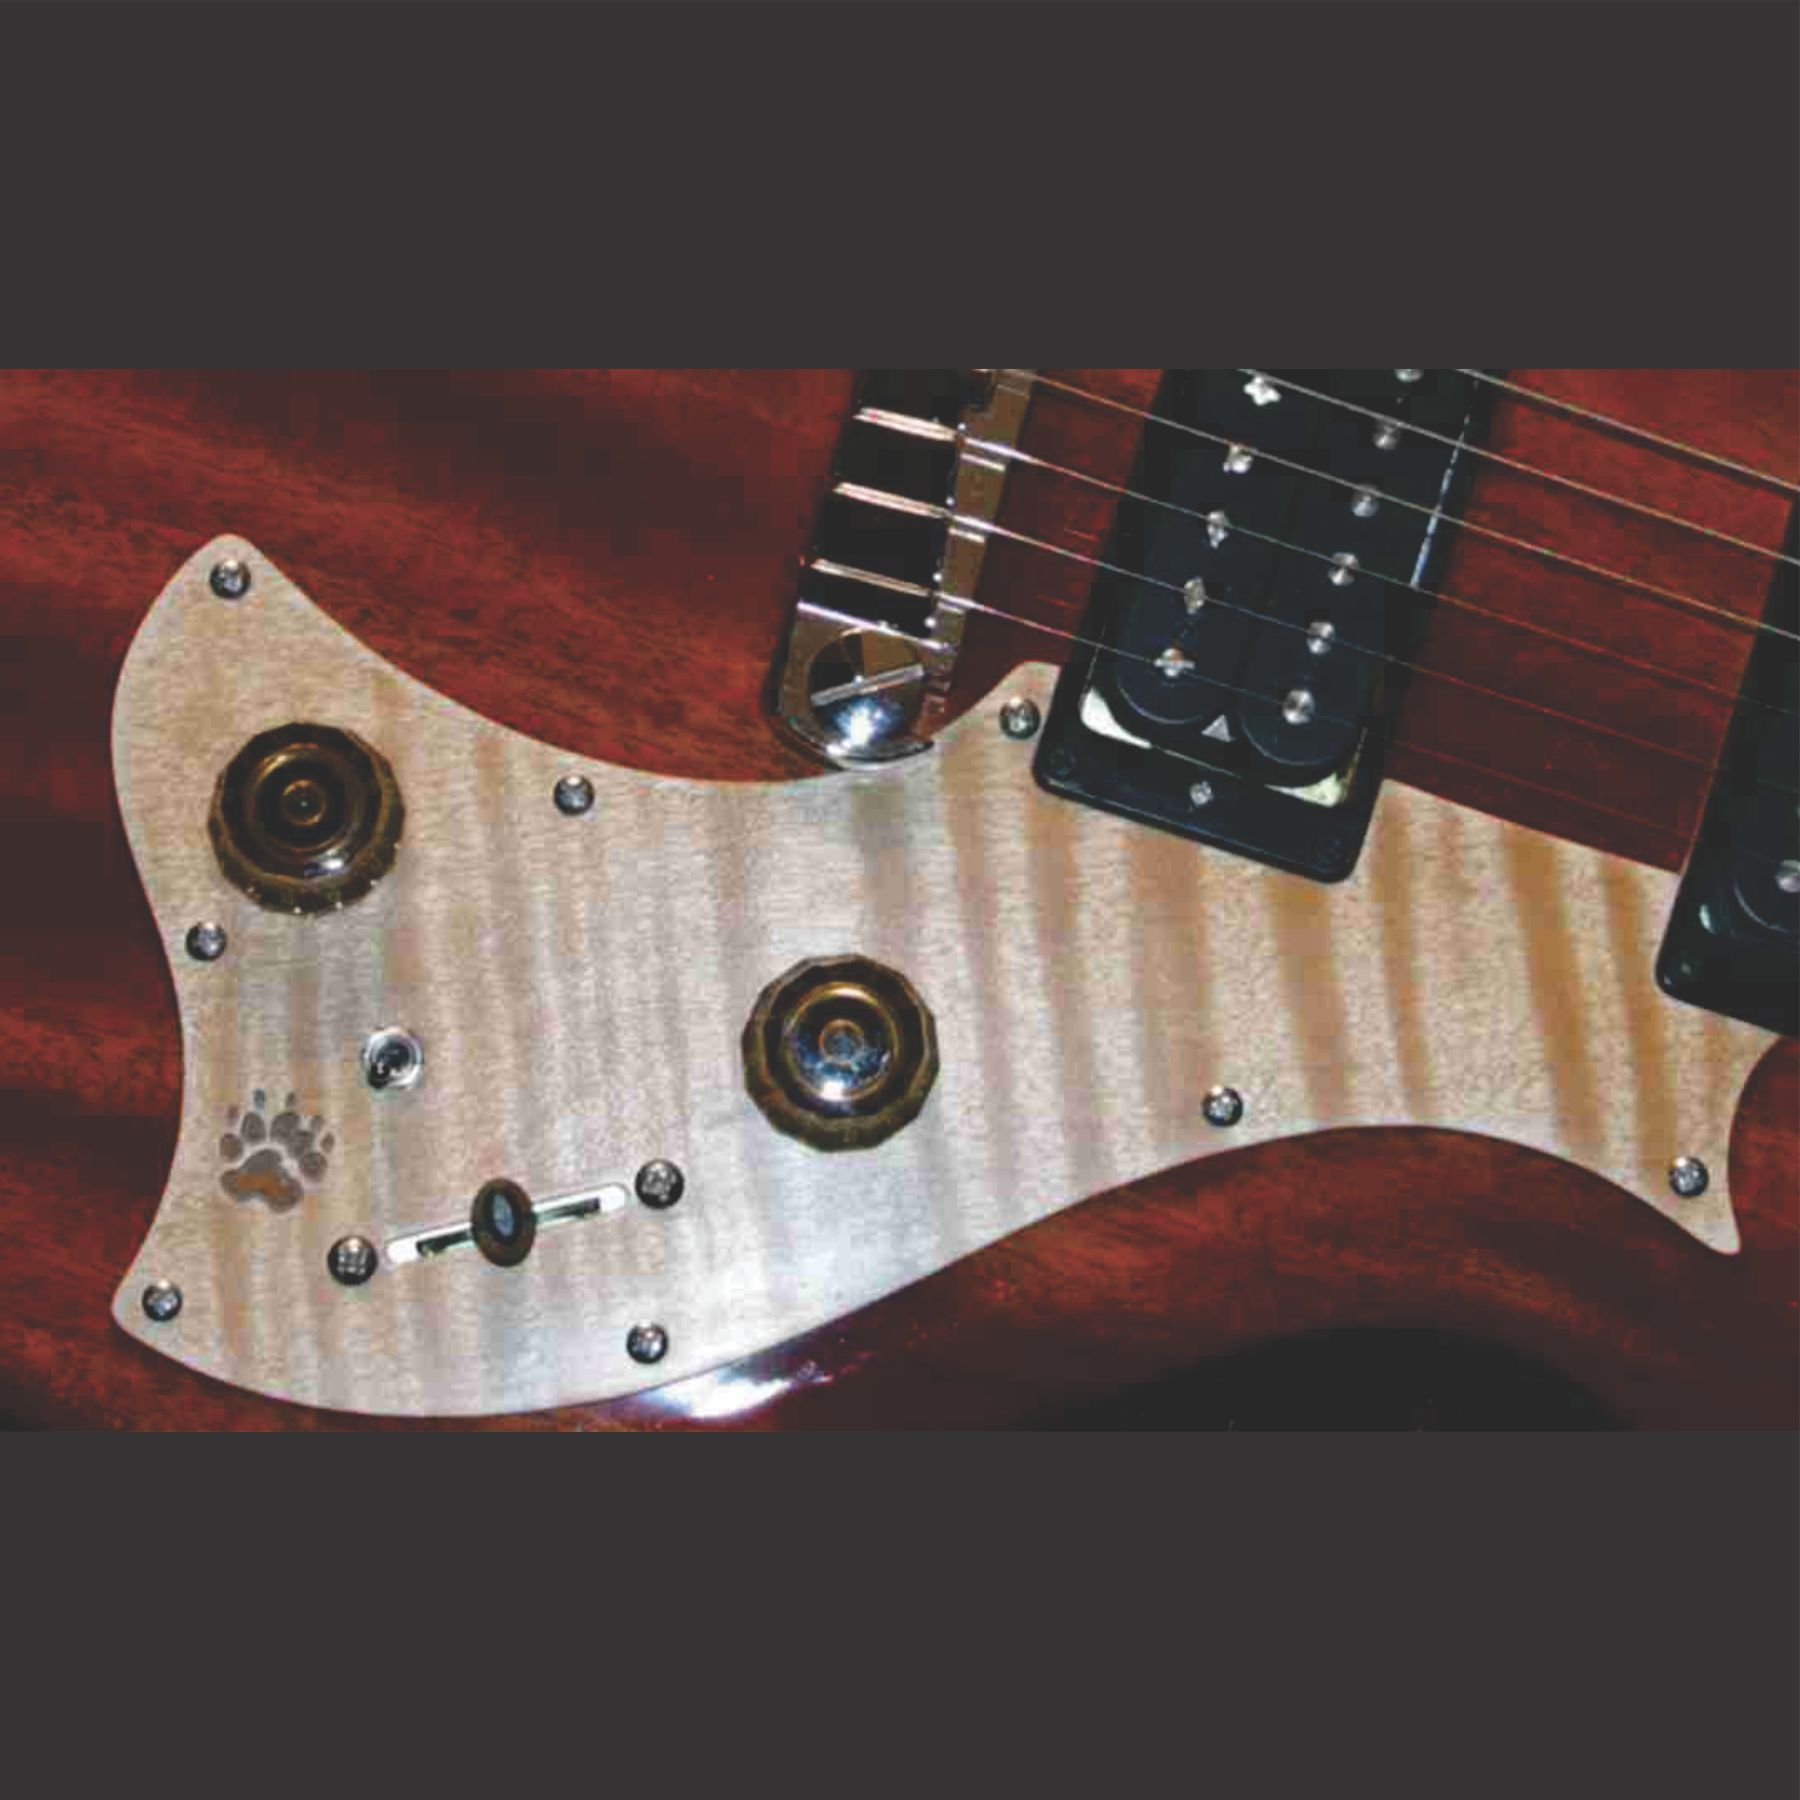 PRS Mira Custom Pickguard Done In Flame Maple With Bear Claw Graphic